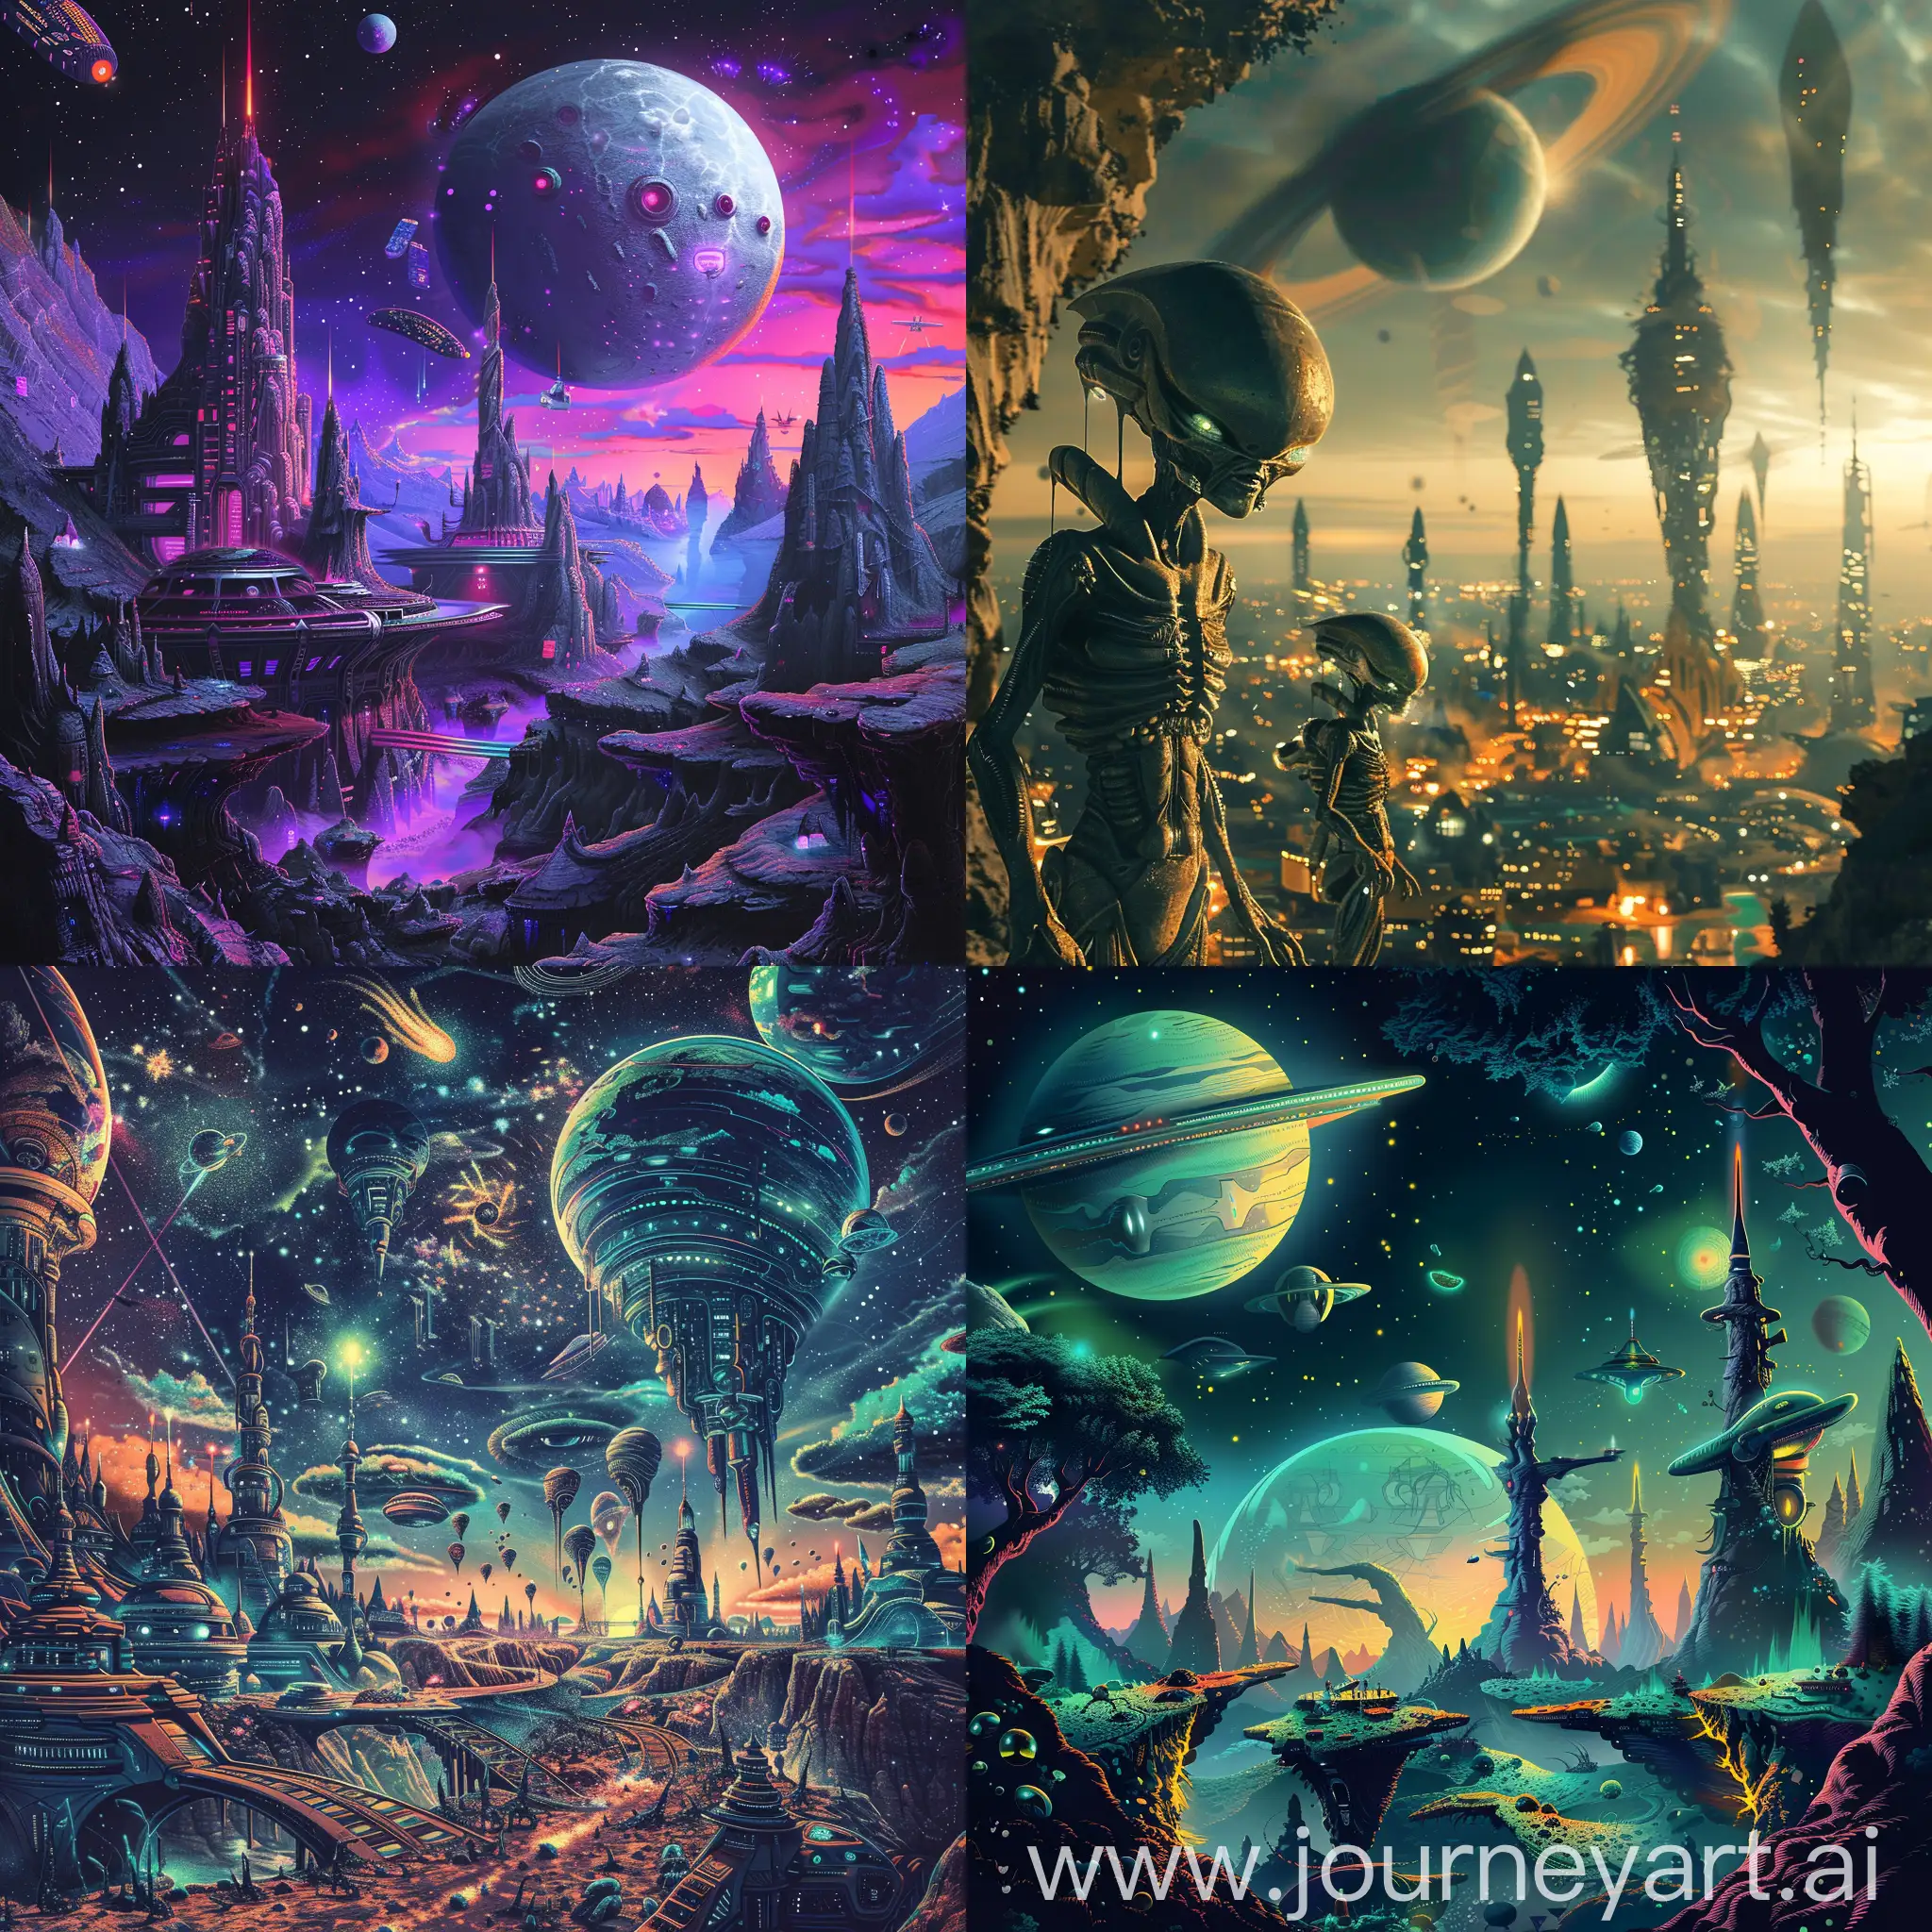 A badass chill trippy background of a futuristic world with aliens